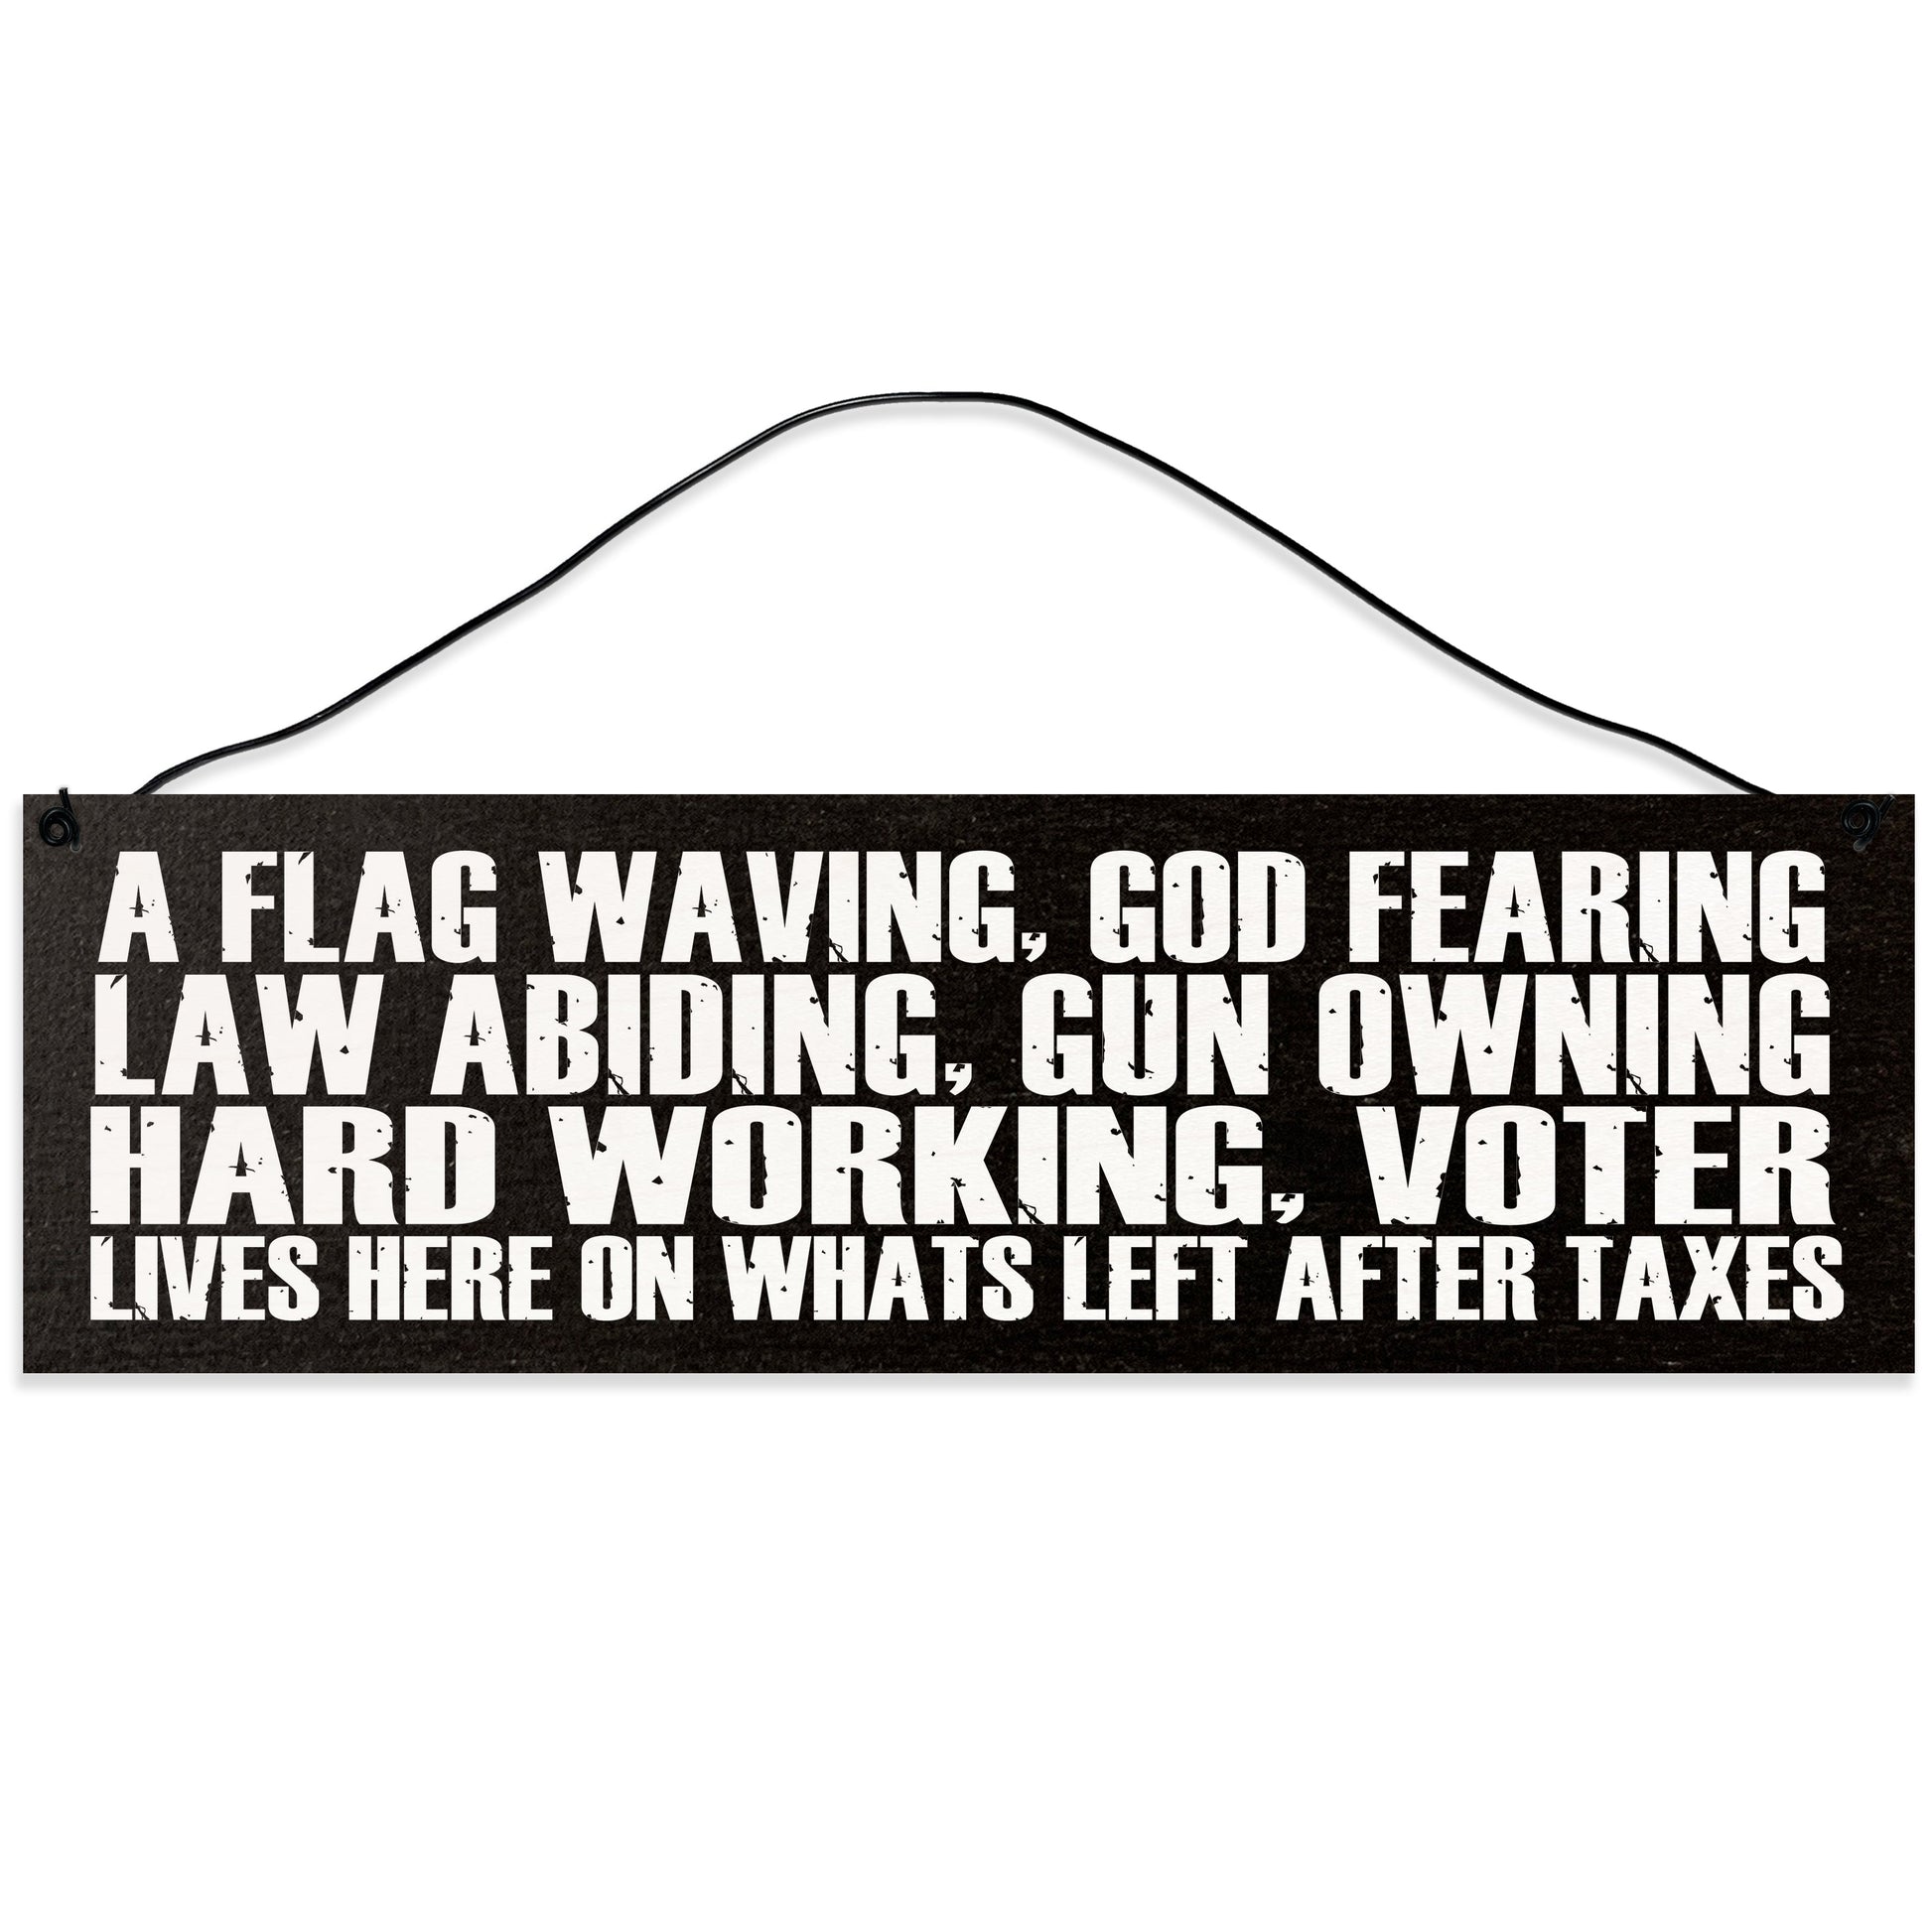 Sawyer's Mill - A Flag Waving, Hardworking, Voter Lives Here. Wood Sign for Home or Office. Measures 3x10 inches.